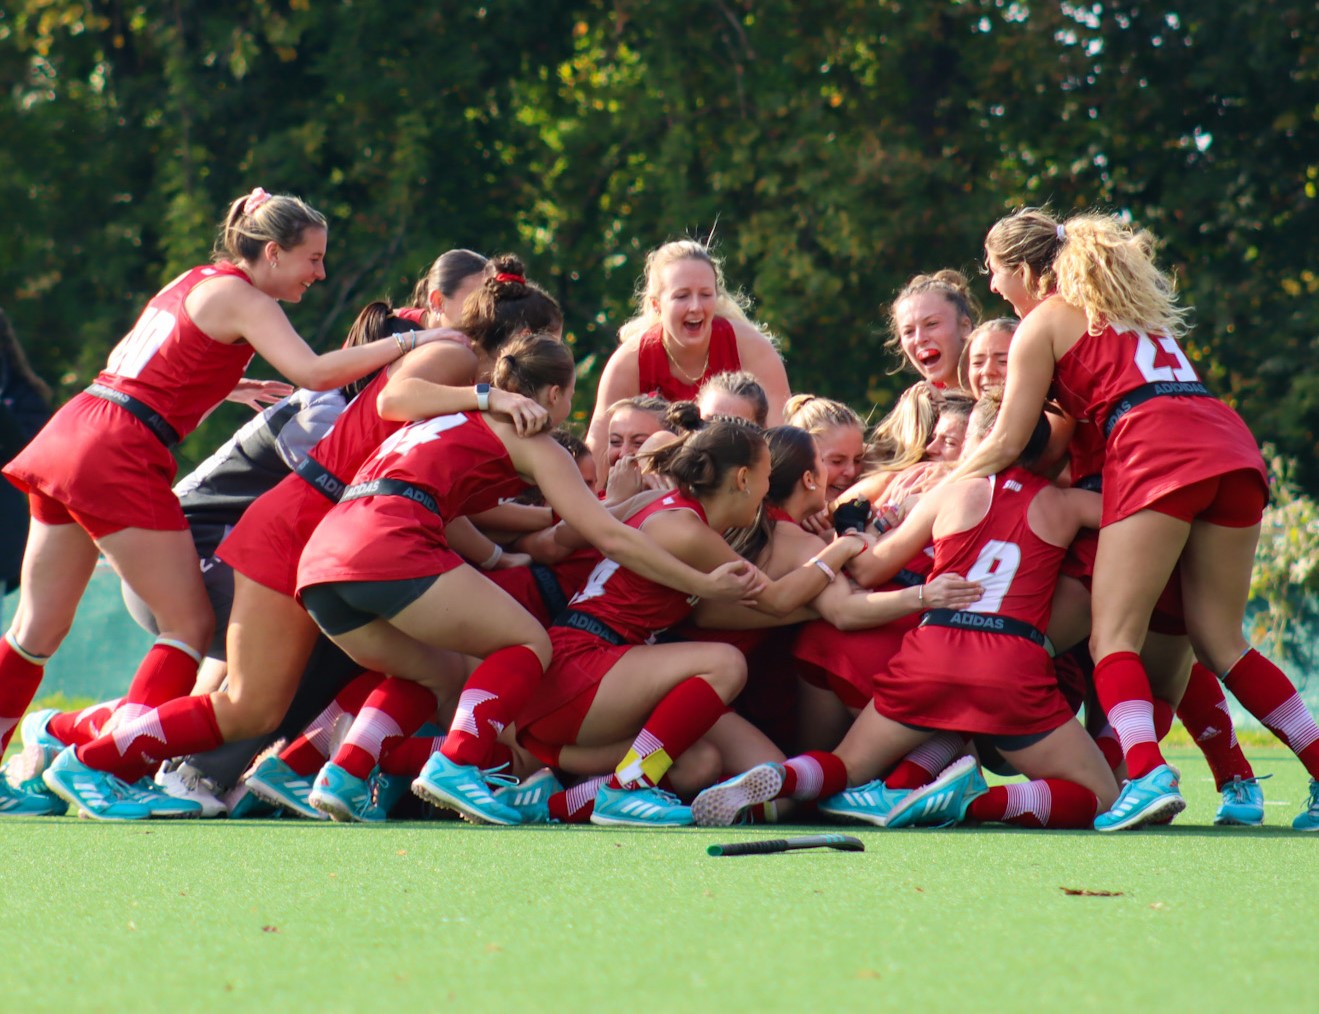 NFHCA Division I Scholars of Distinction Announced – Michigan State University and Sacred Heart University Lead the Way